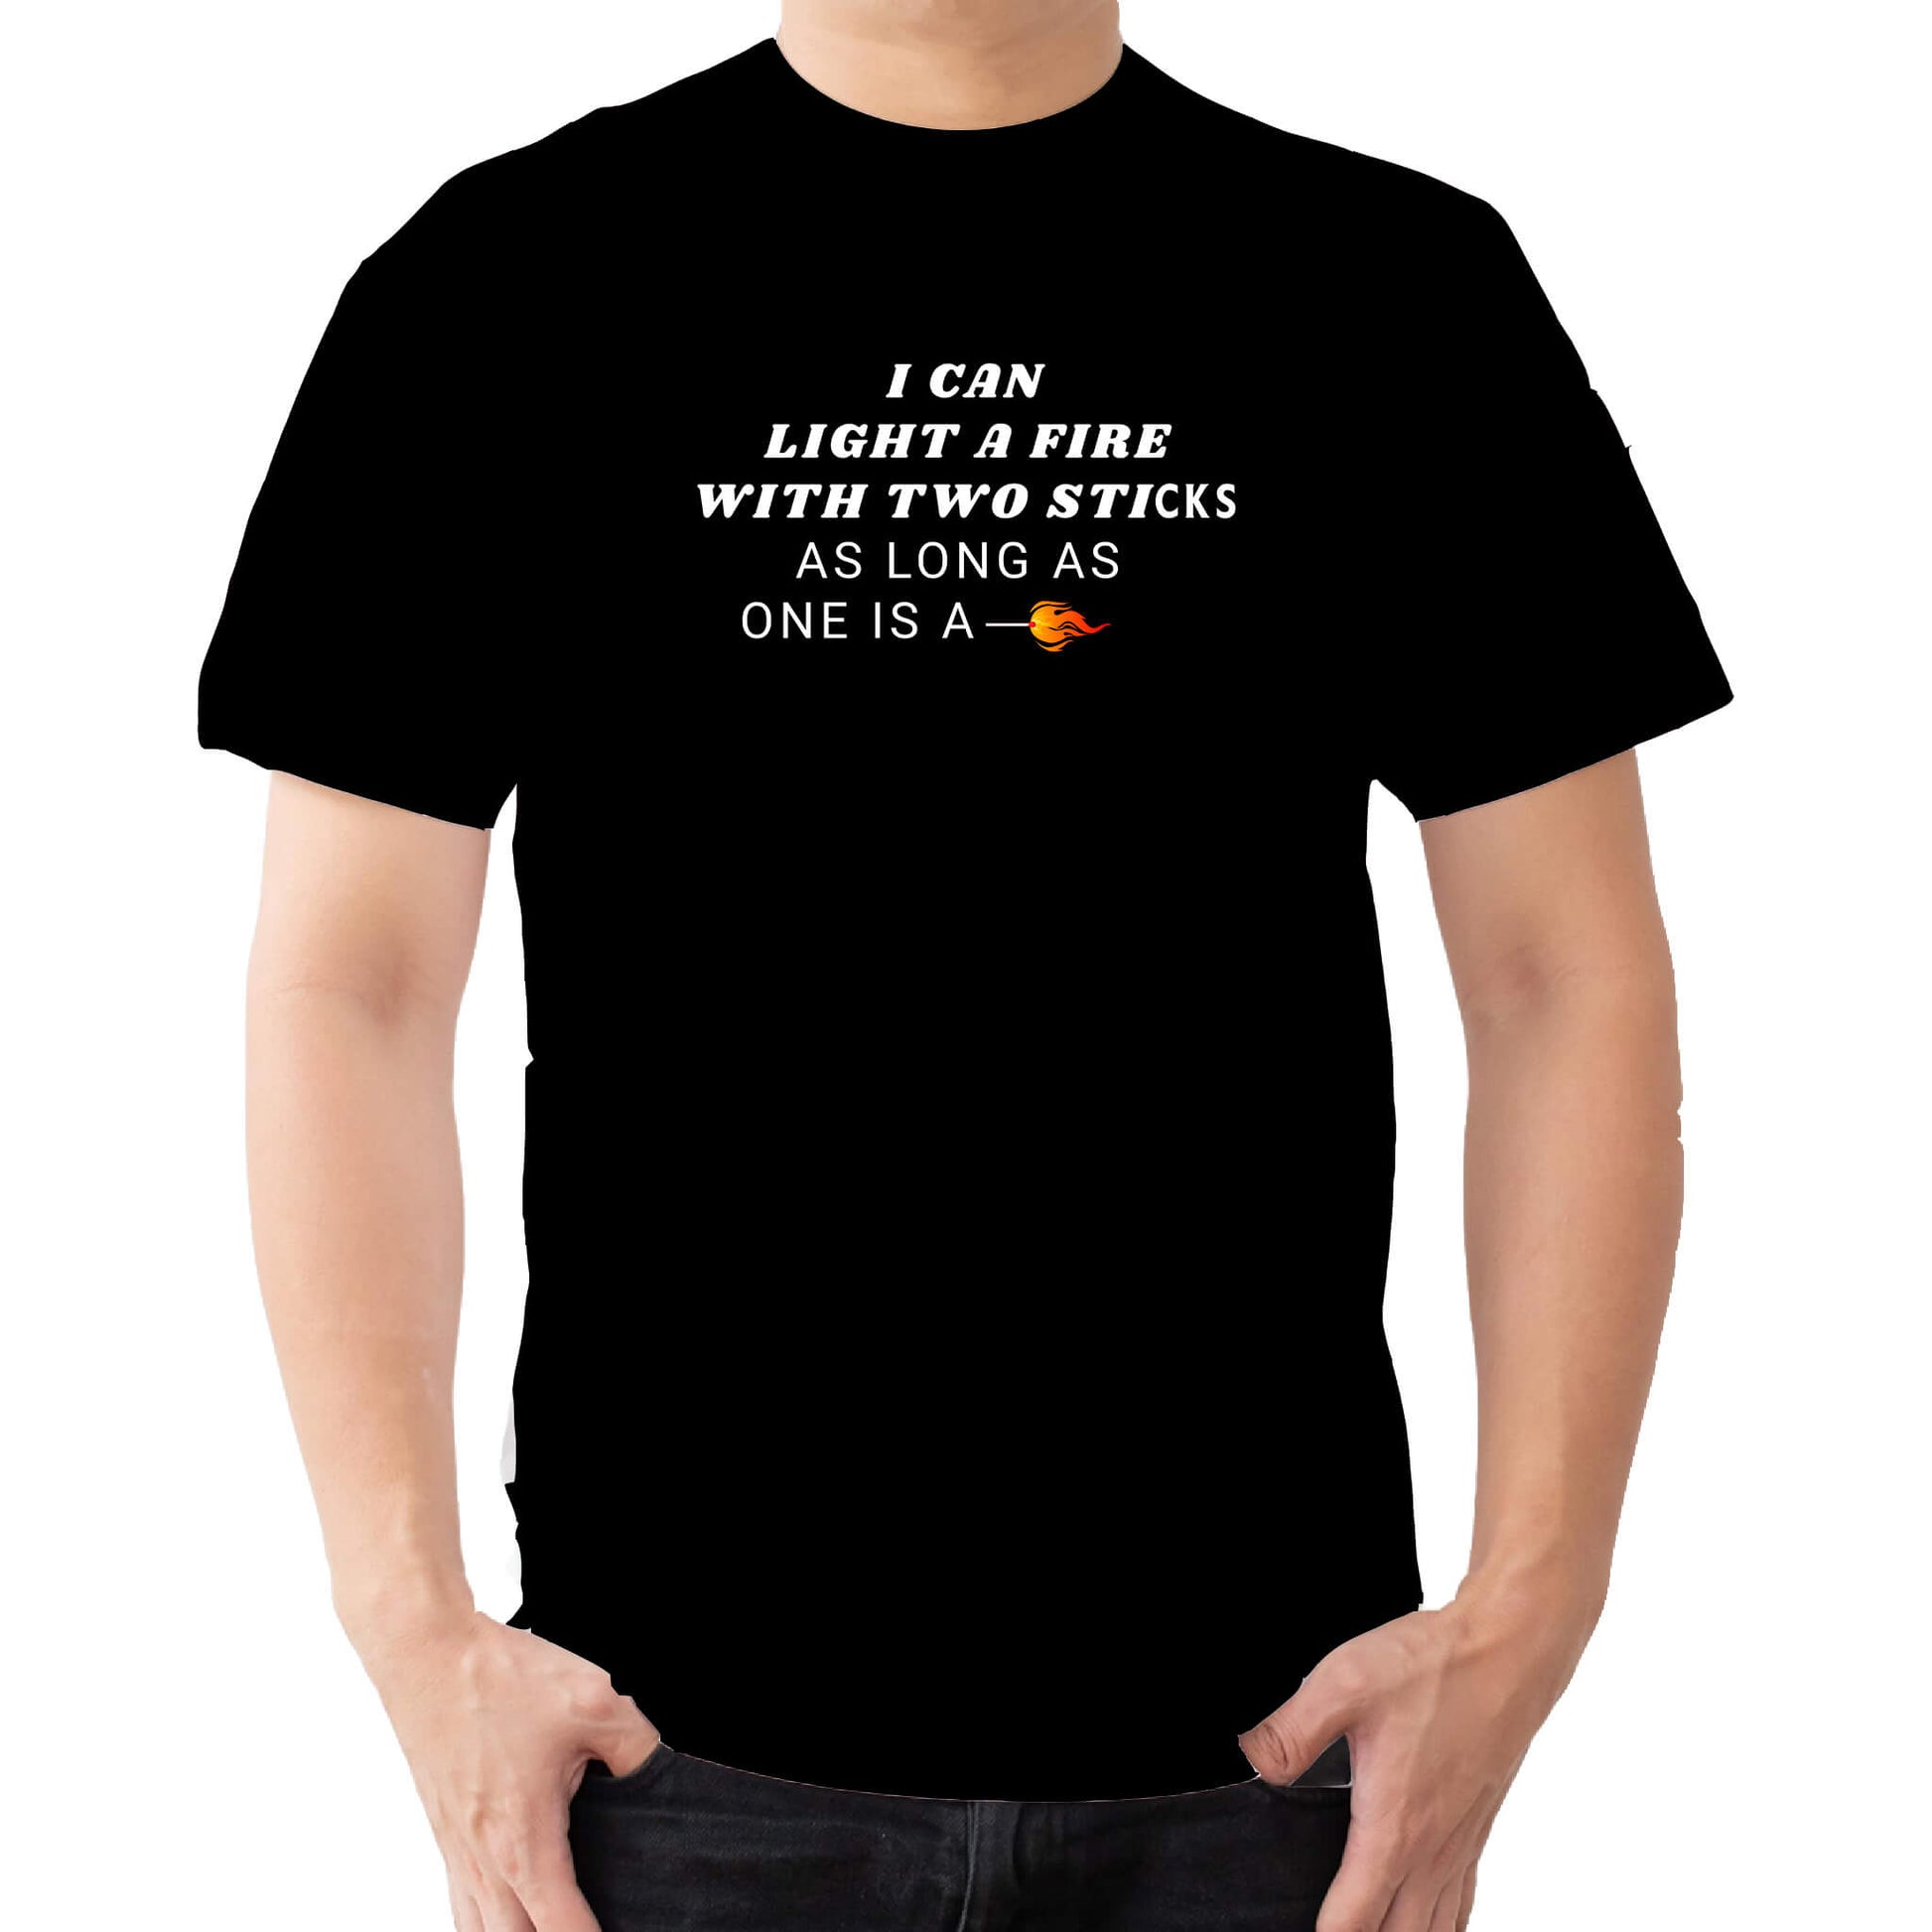 I can light a fire with two sticks t-shirt black